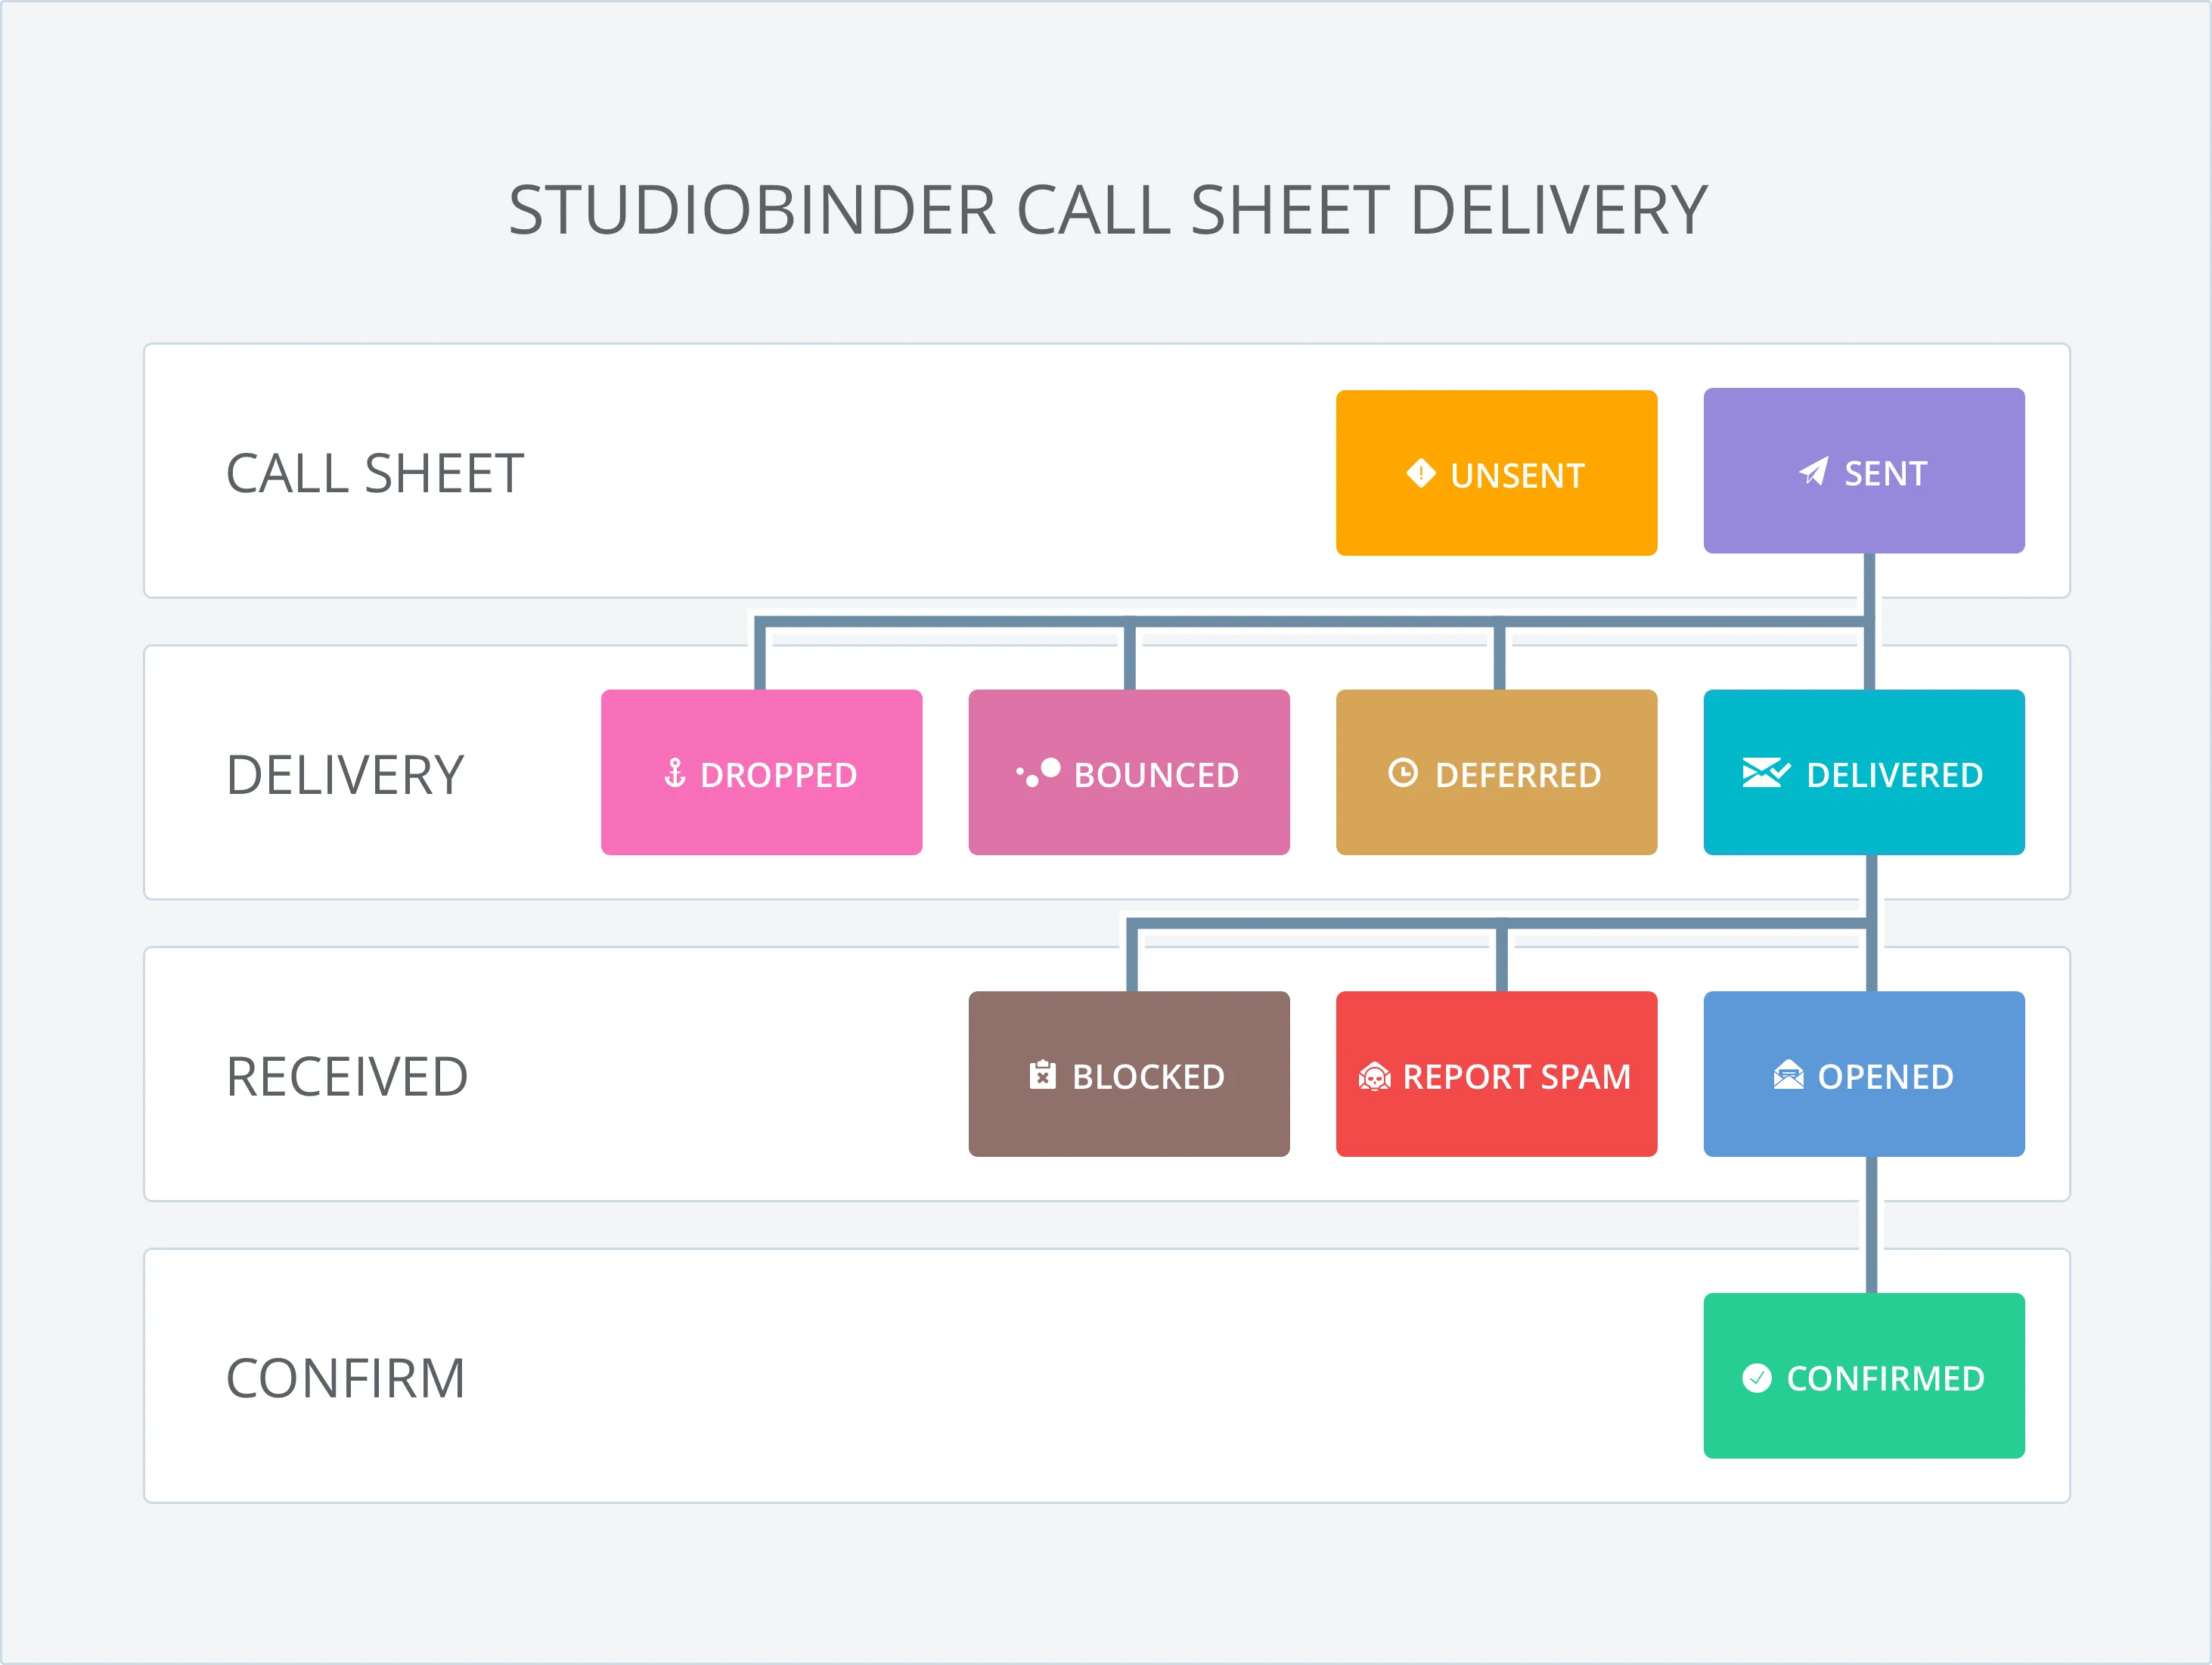 StudioBinder Call Sheet Email Delivery Workflow Diagram - Track Call Sheet Confirmations